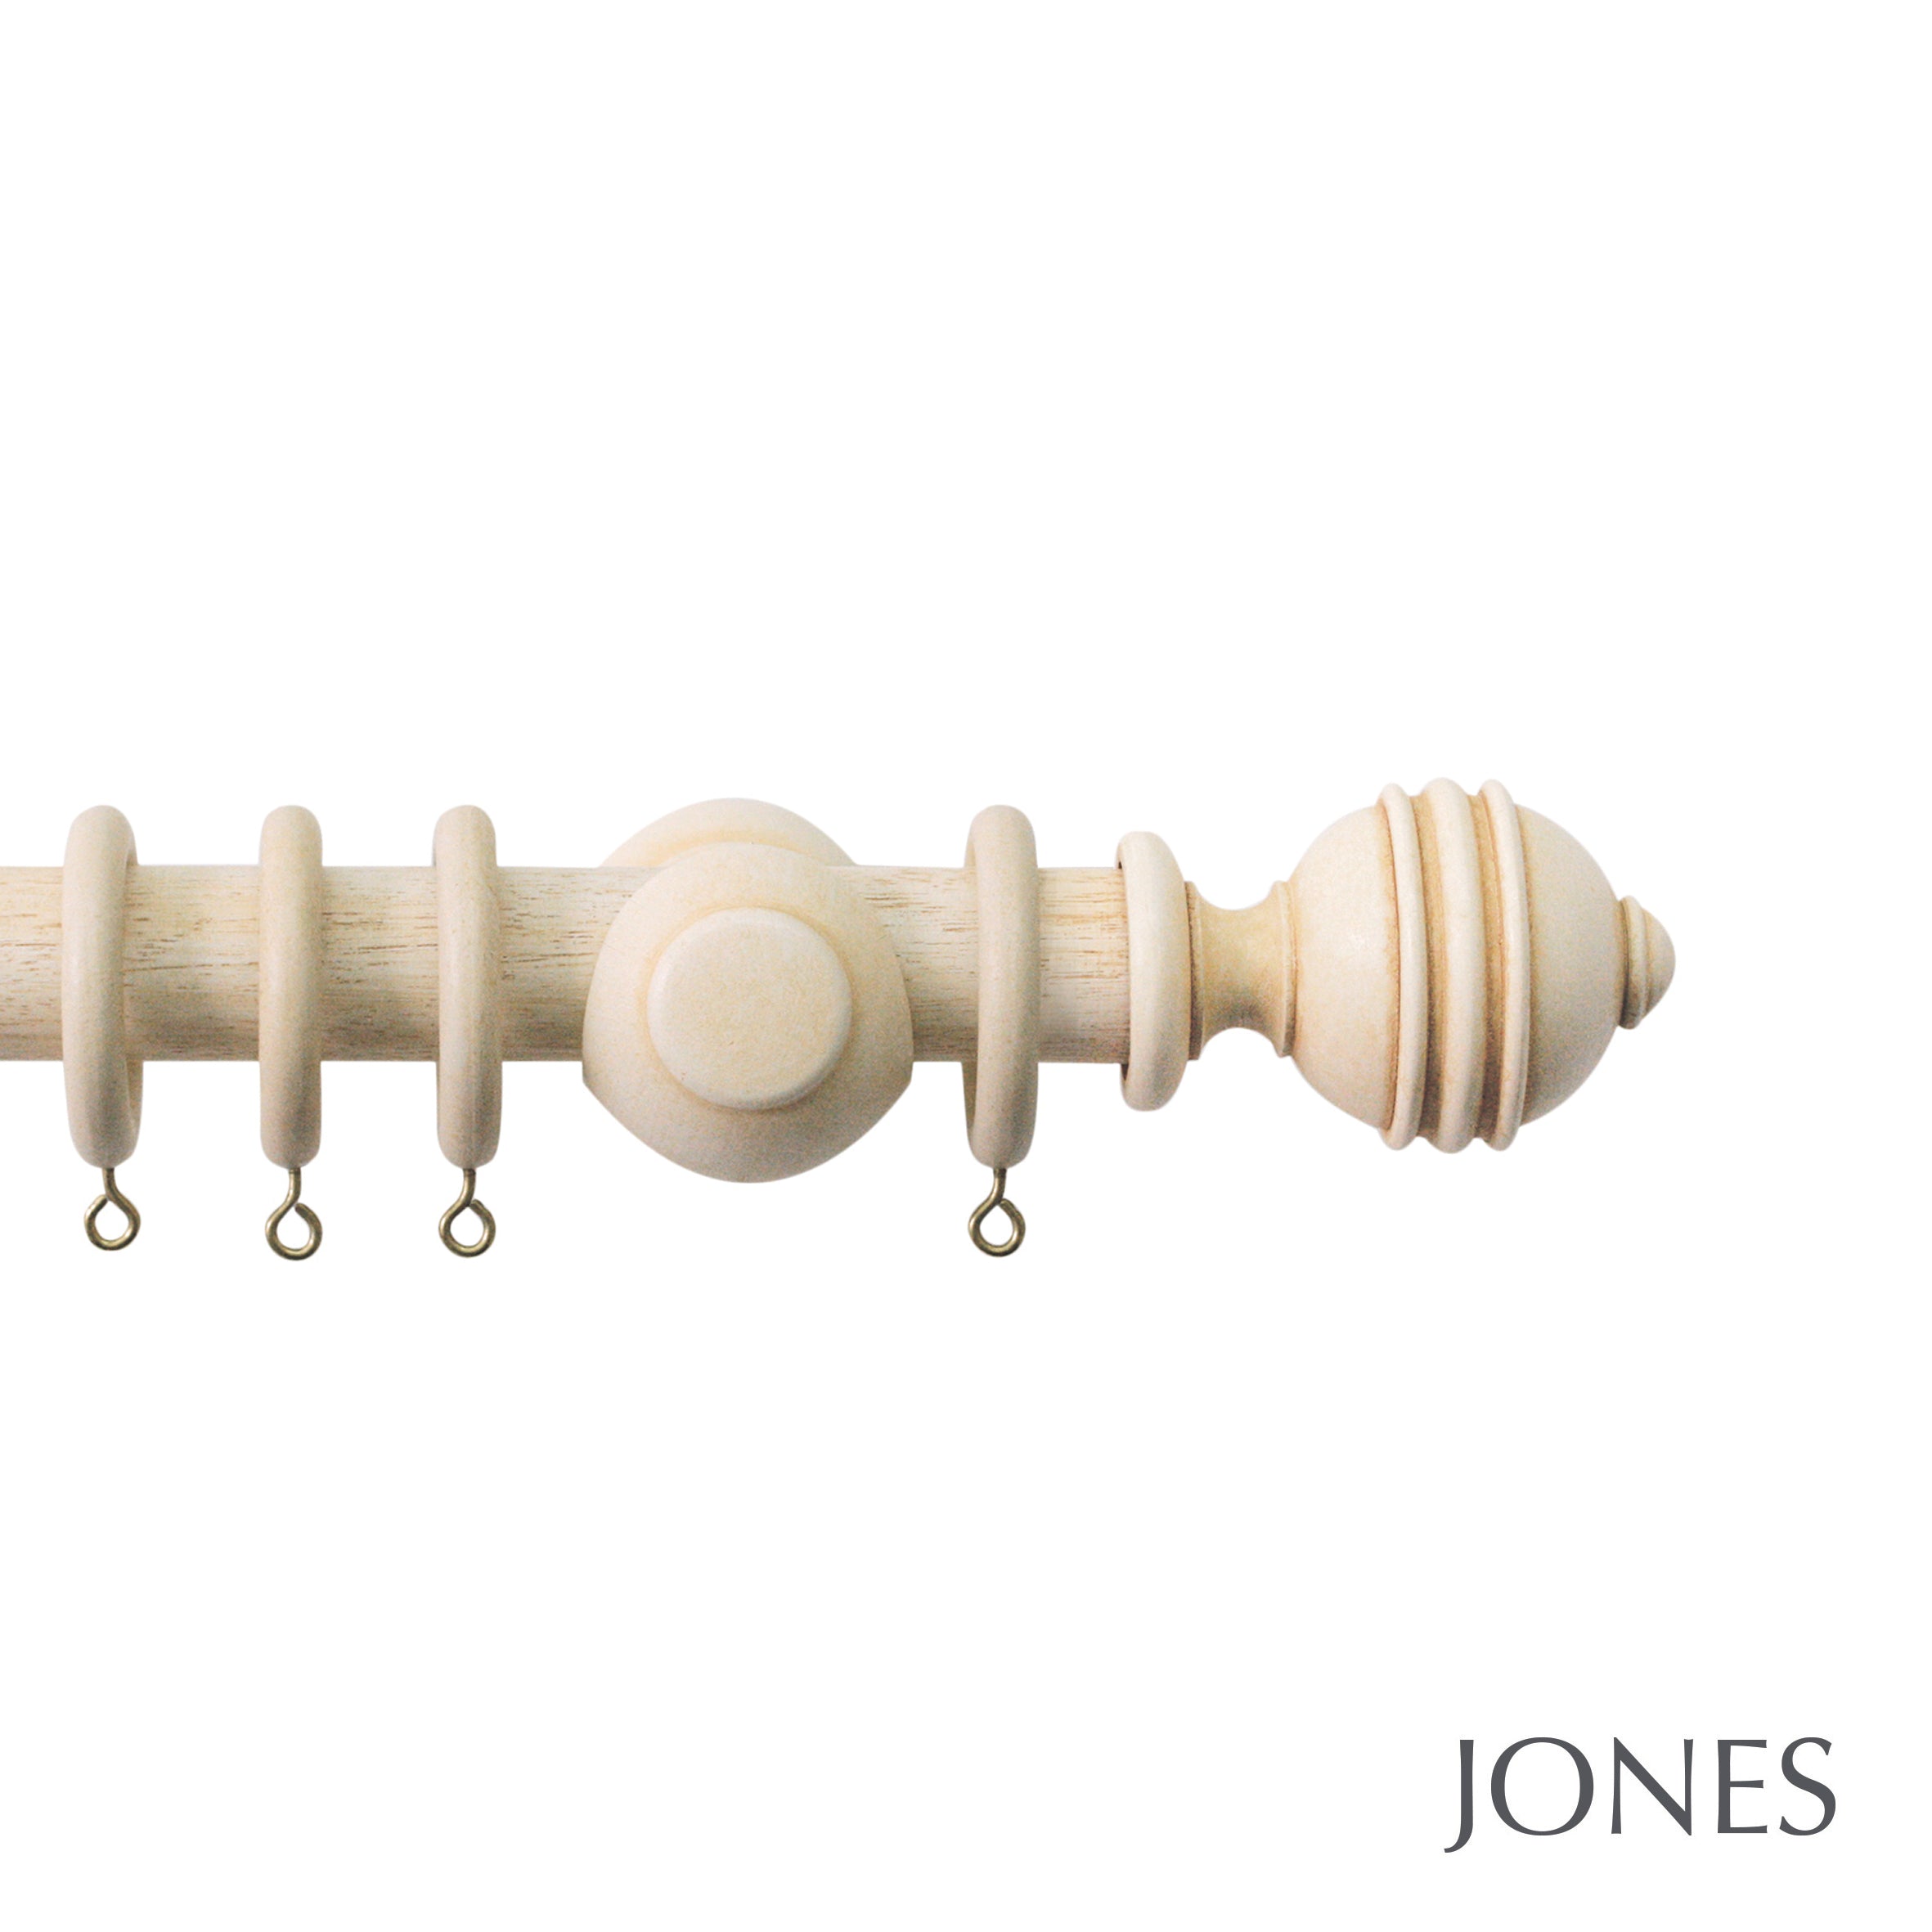 Jones Interiors Cathedral Ely Finial Curtain Pole Set in Ivory